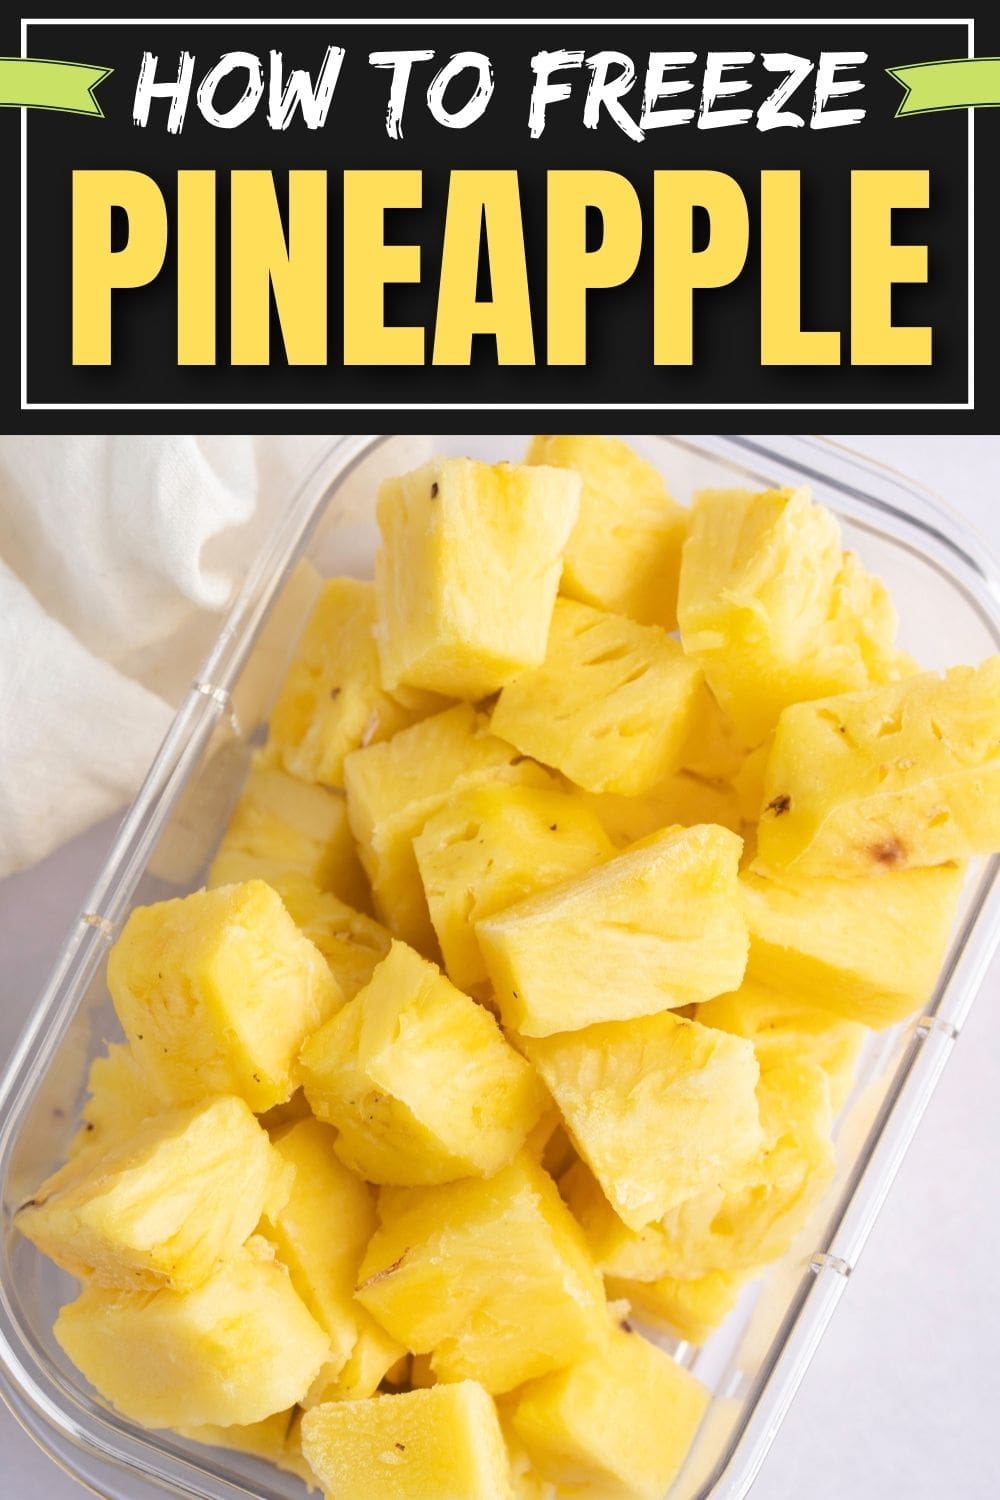 How to Freeze Pineapple (+Tips and Tricks!) - Insanely Good